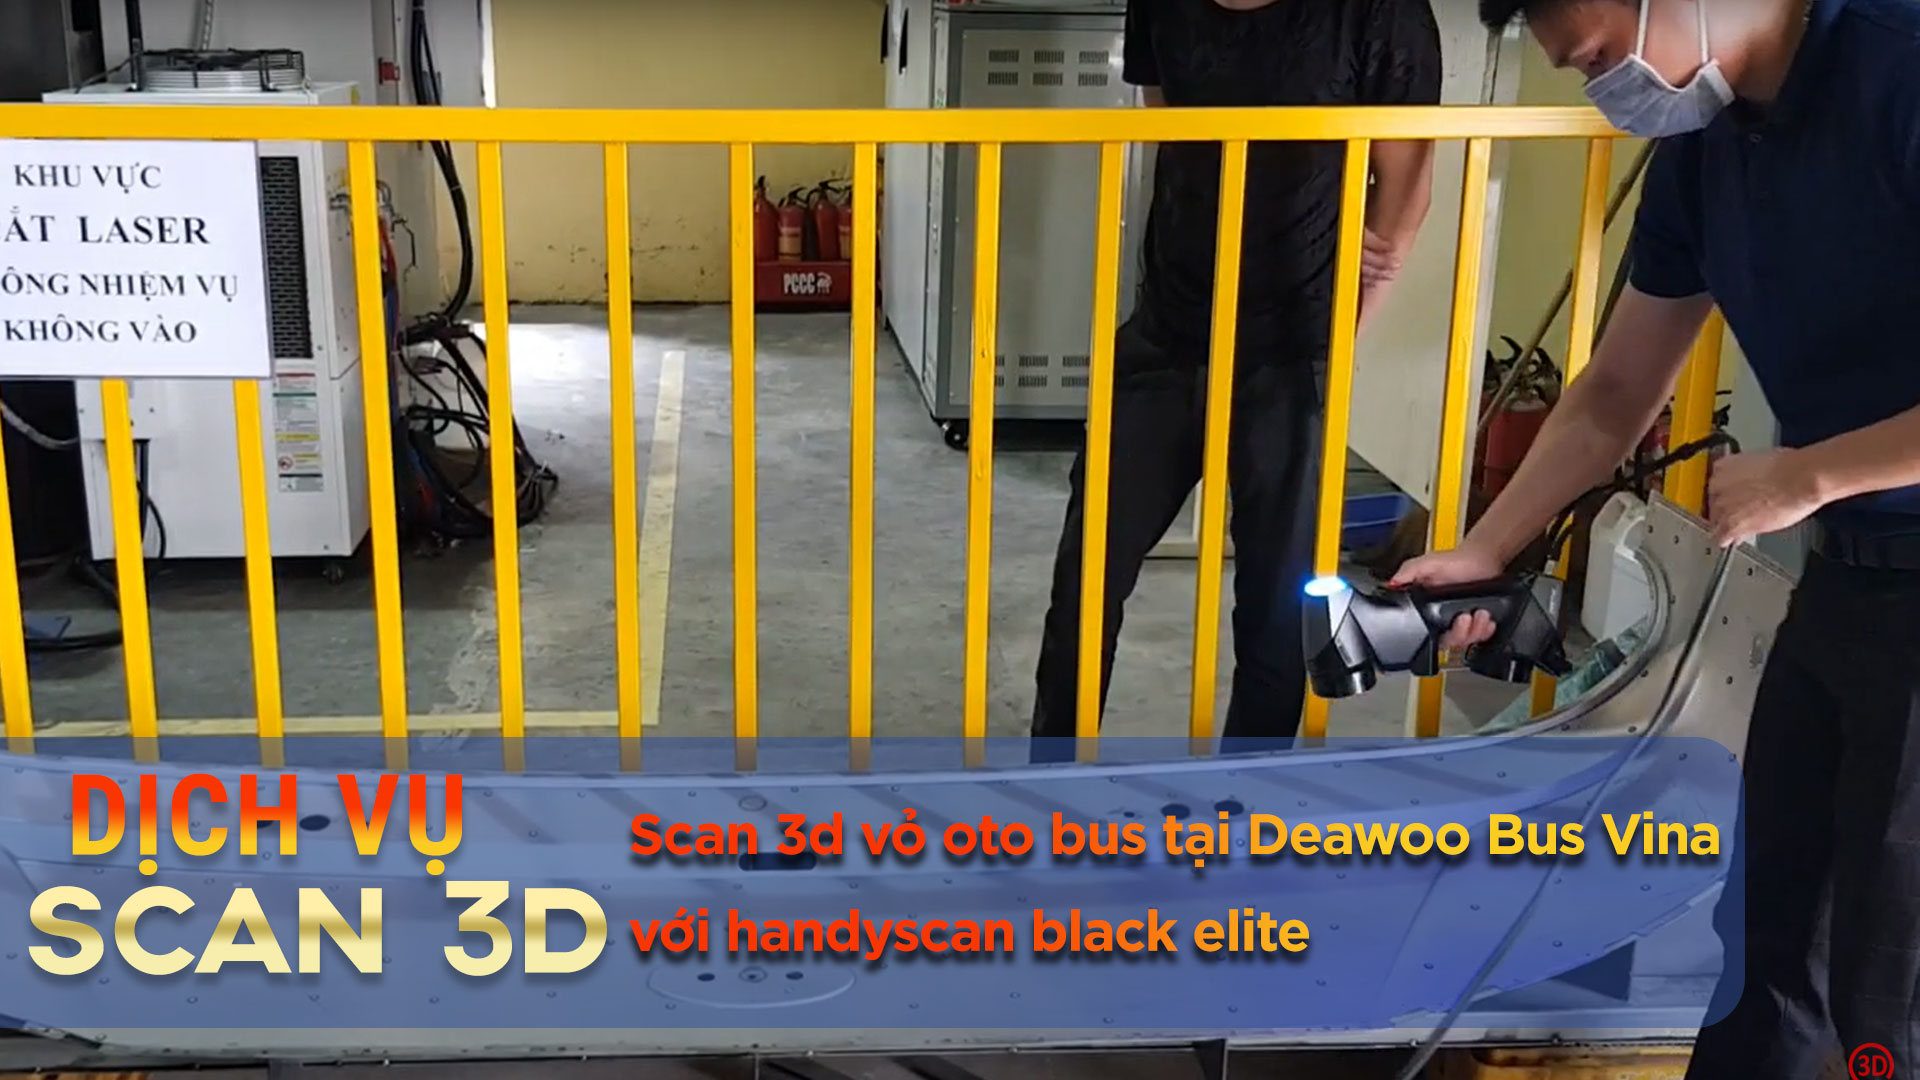  Scan 3d car cover at Daewoo Bus Vina with Handyscan Black Elite